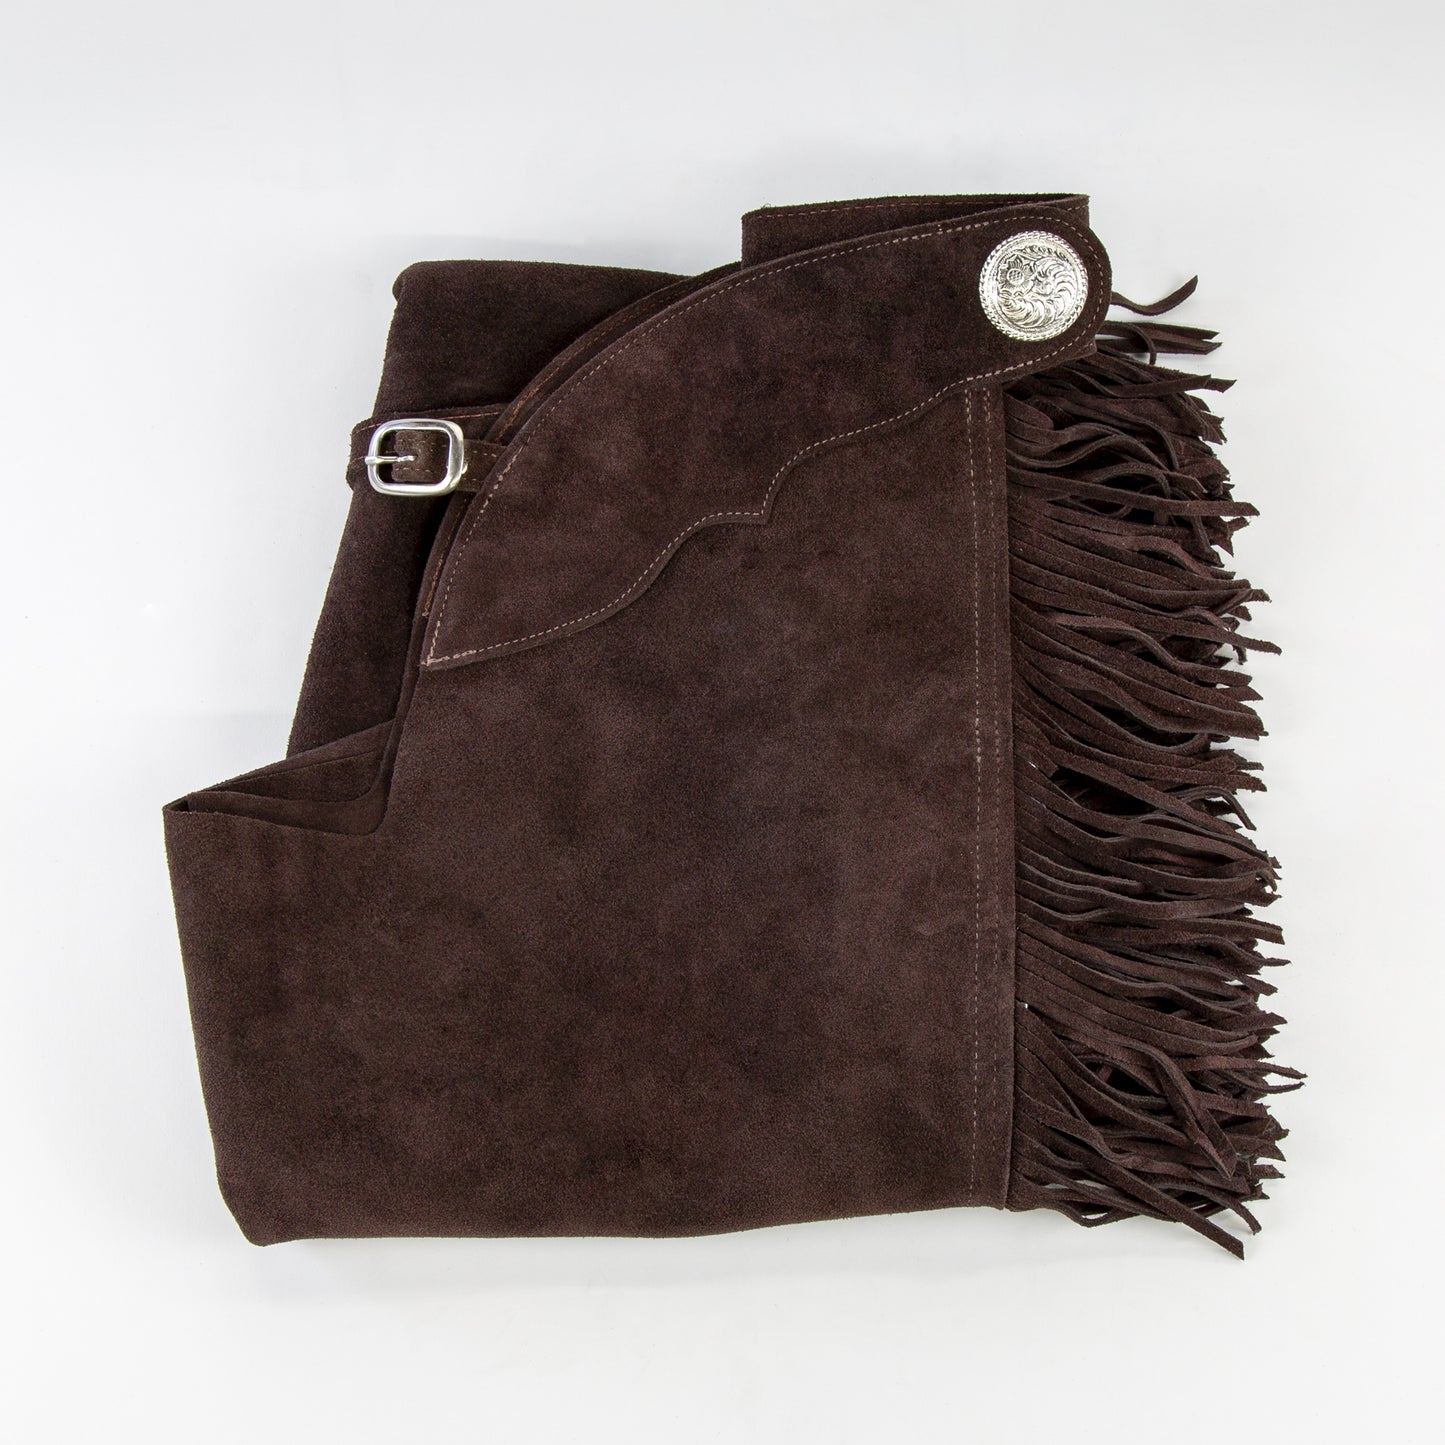 Western Equitation Chaps - Brown Suede - Fringe - Double Concho